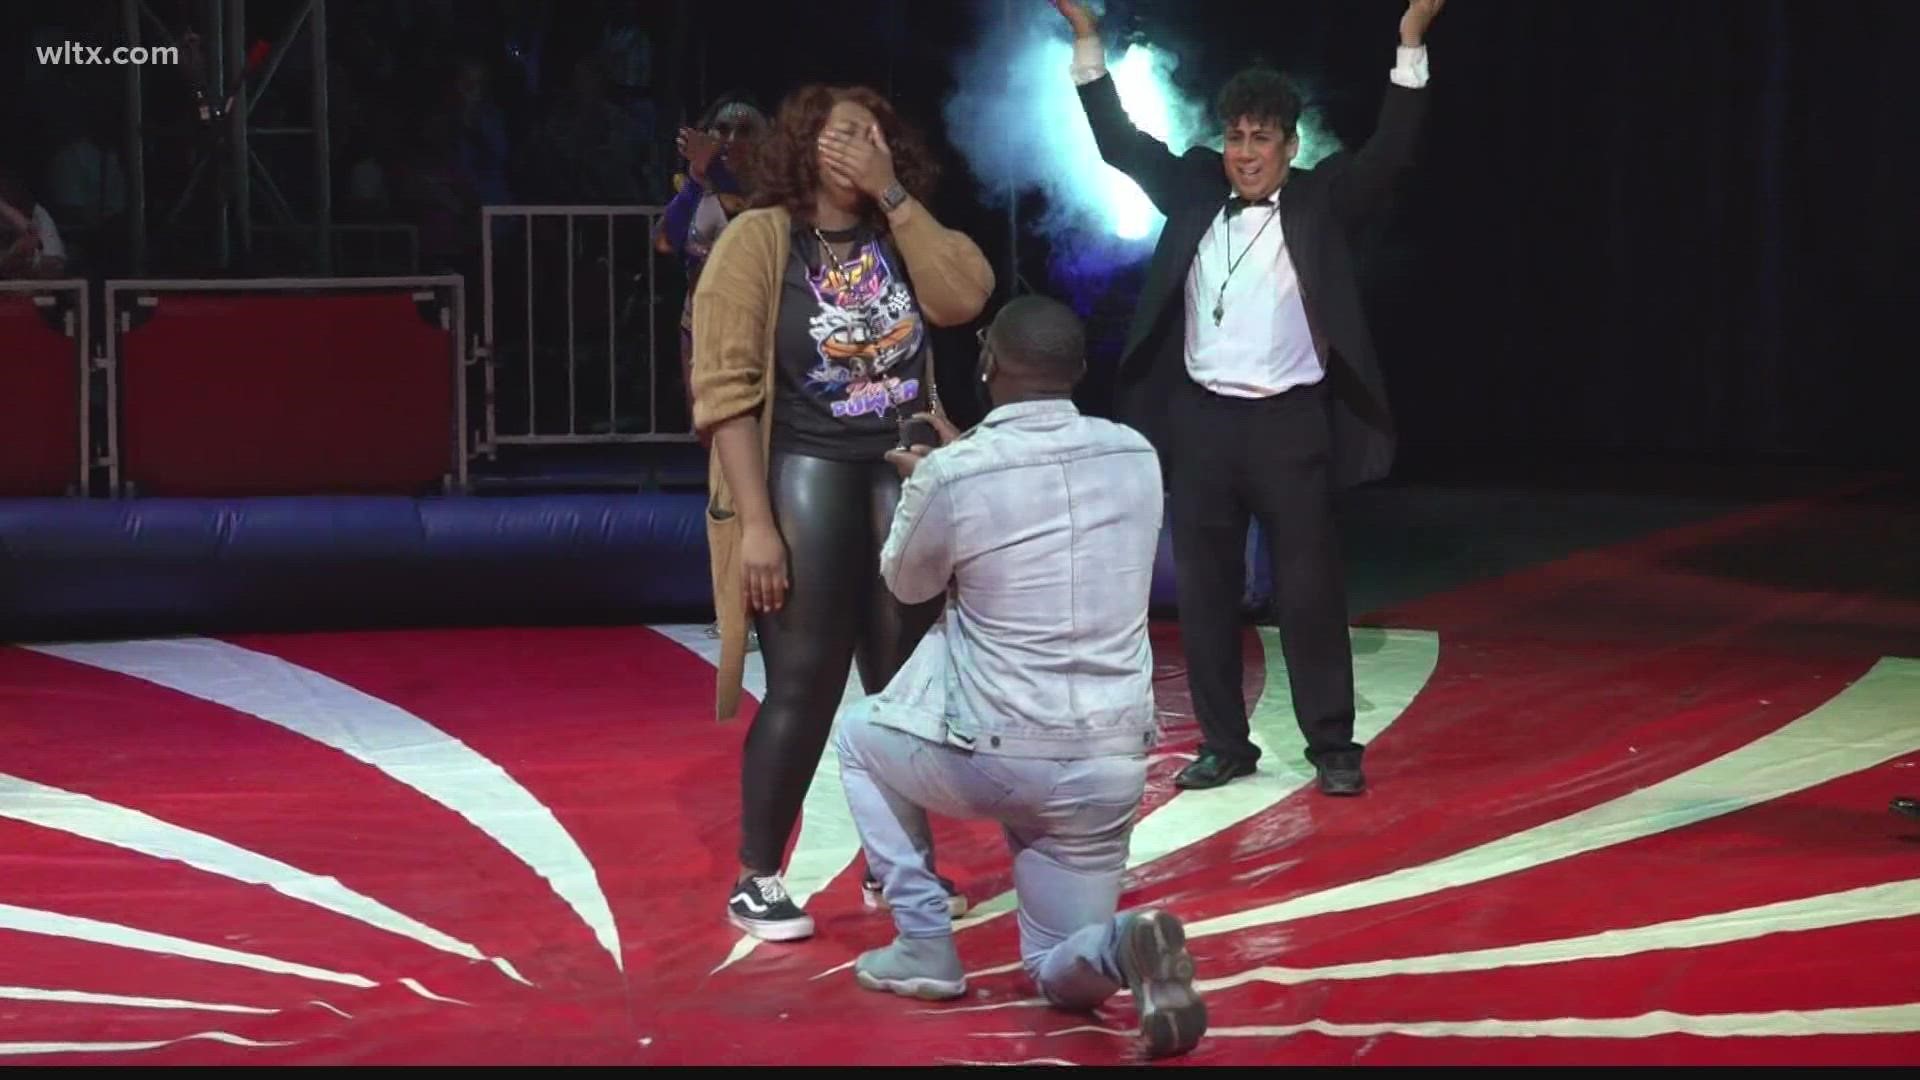 Tierra Belcher was surprised to see her boyfriend walk out in the middle of the circus, get down on one knee, and ask her to marry him.